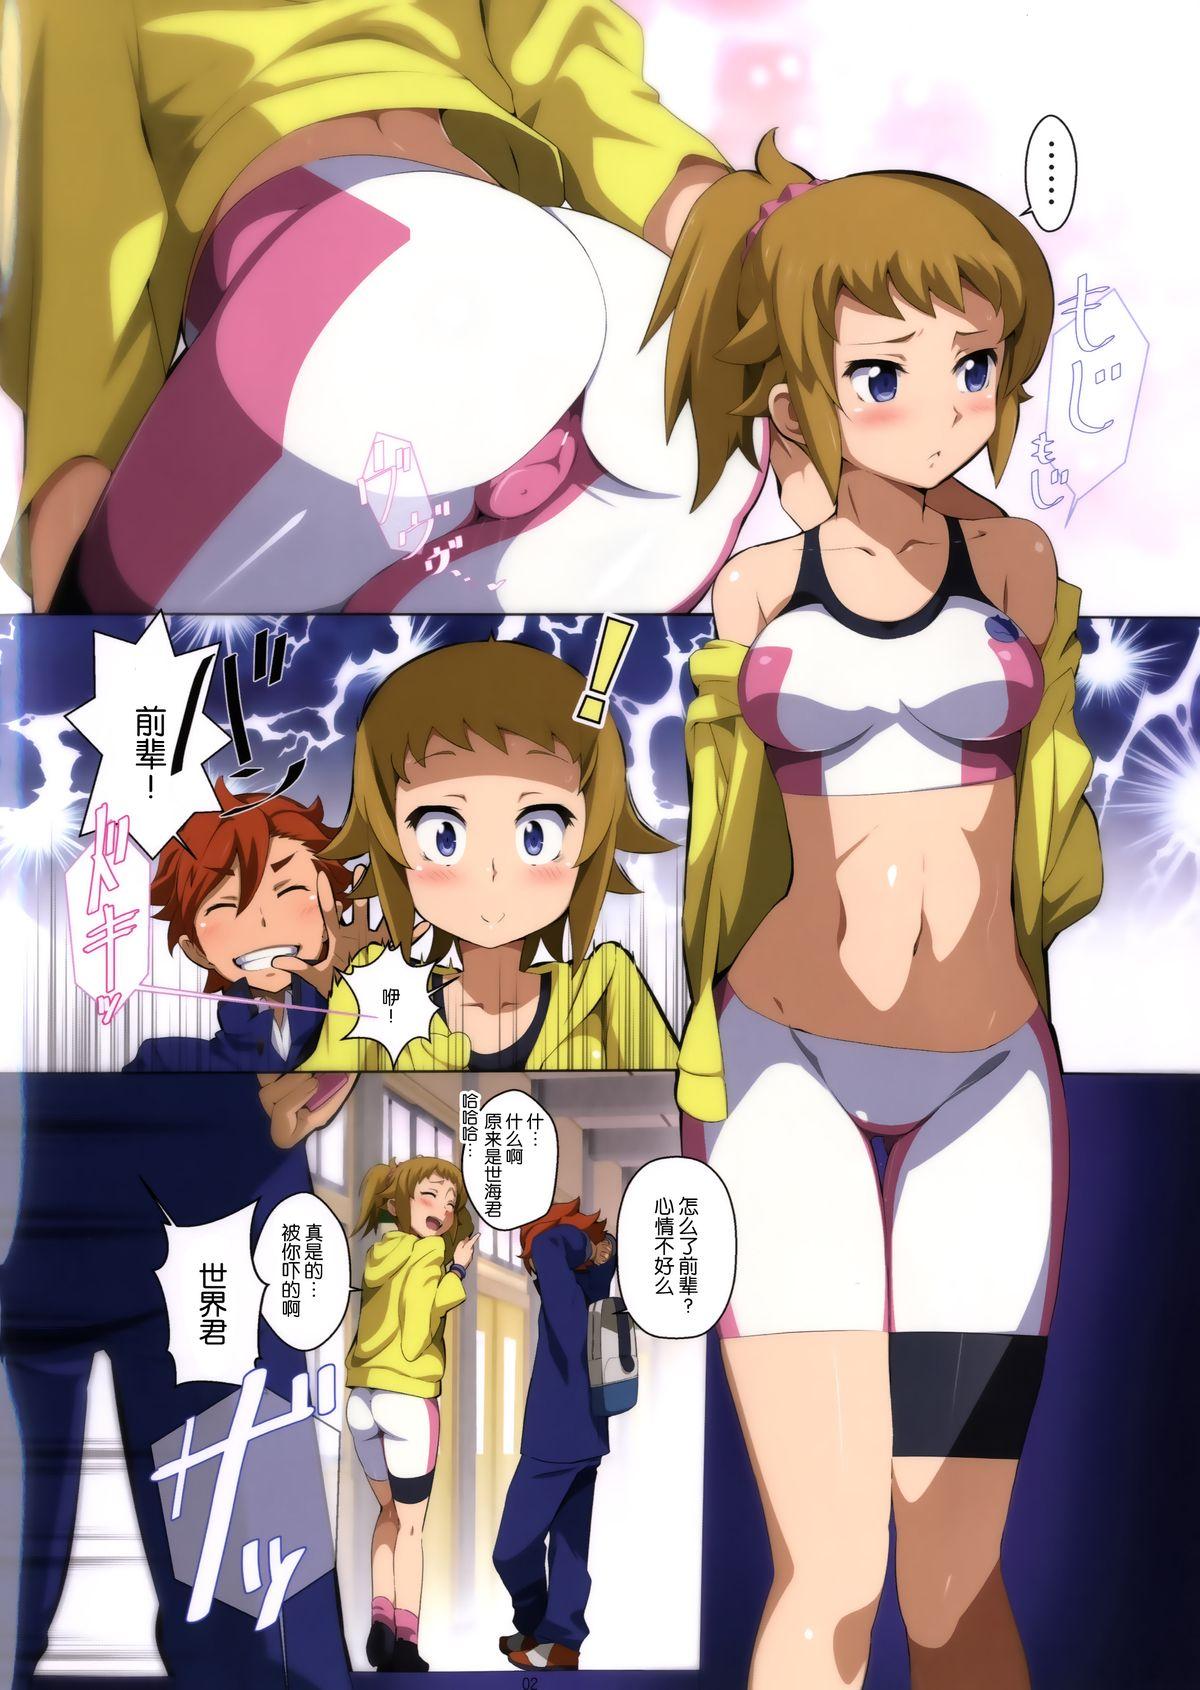 Deutsche BATTLE END FUMINA - Gundam build fighters try Pussyeating - Page 3